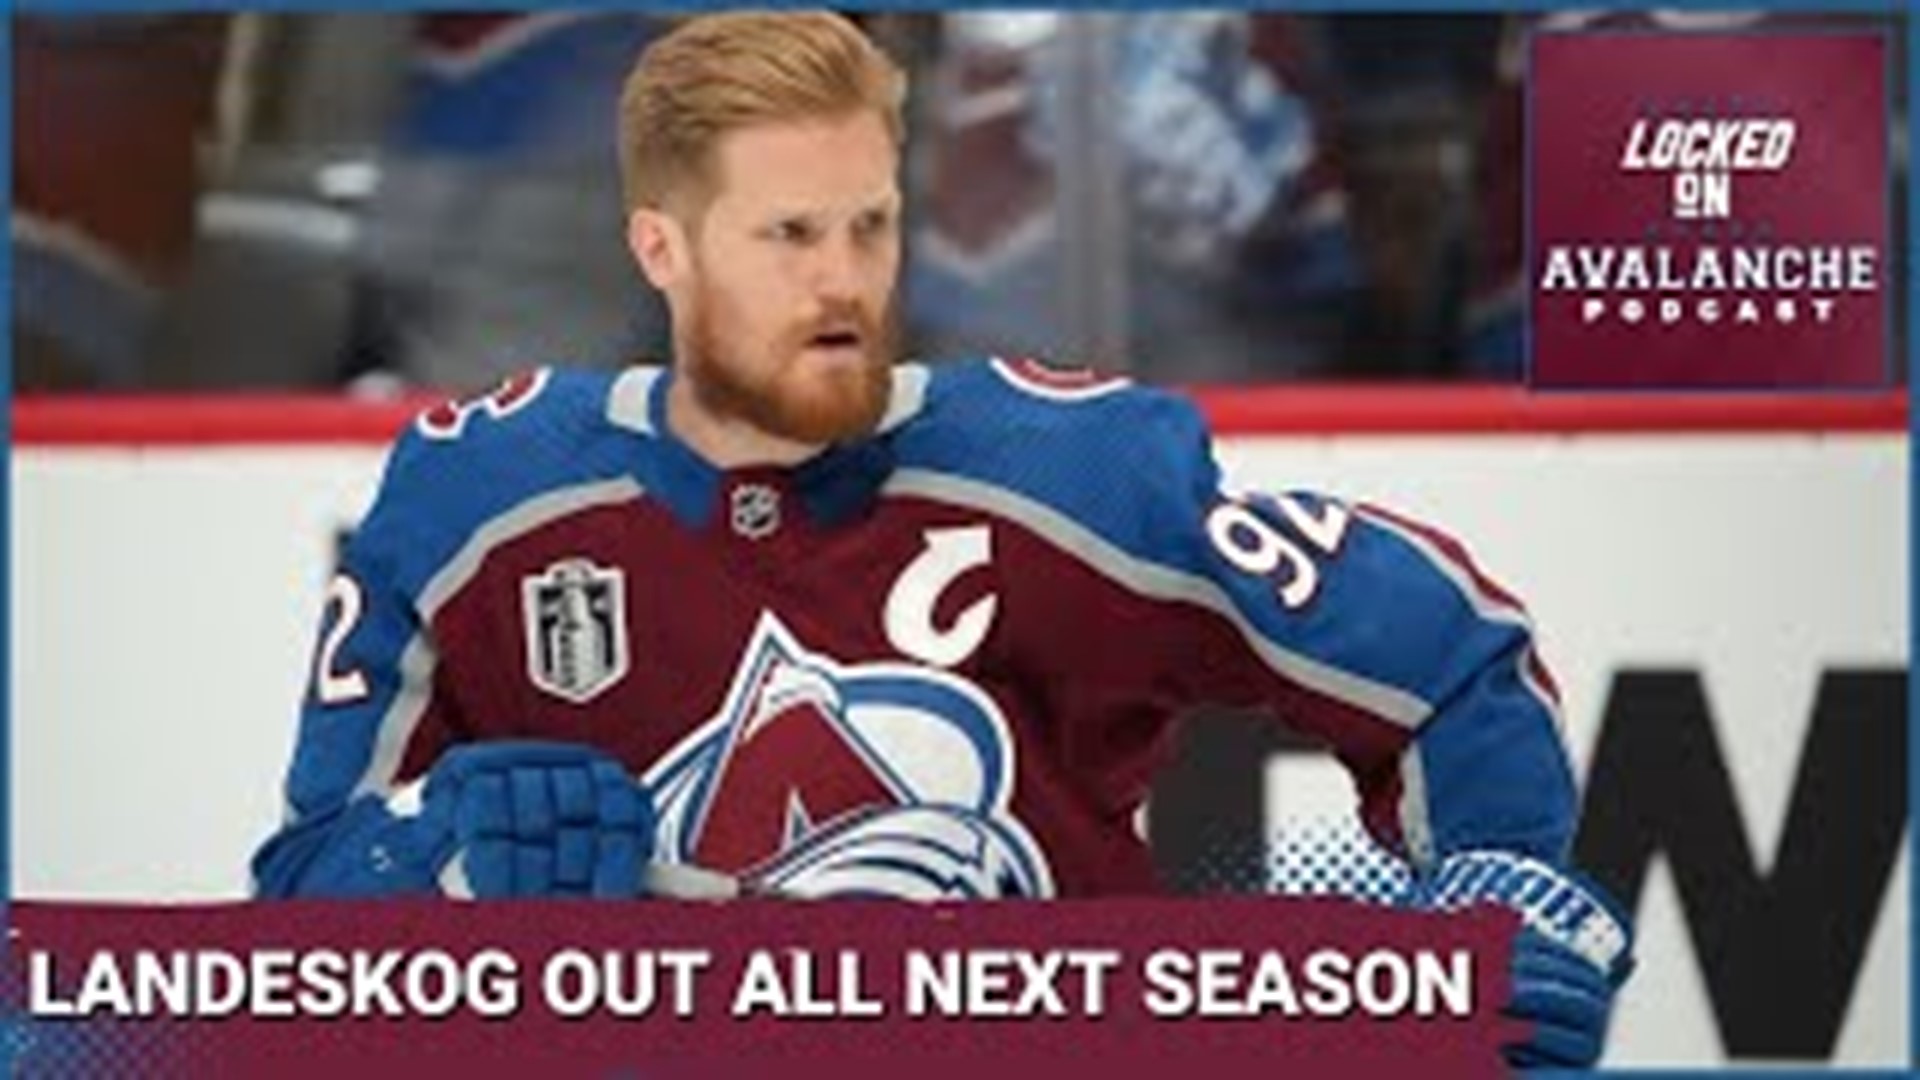 Avalanche captain Gabe Landeskog remains out with cryptic “lower